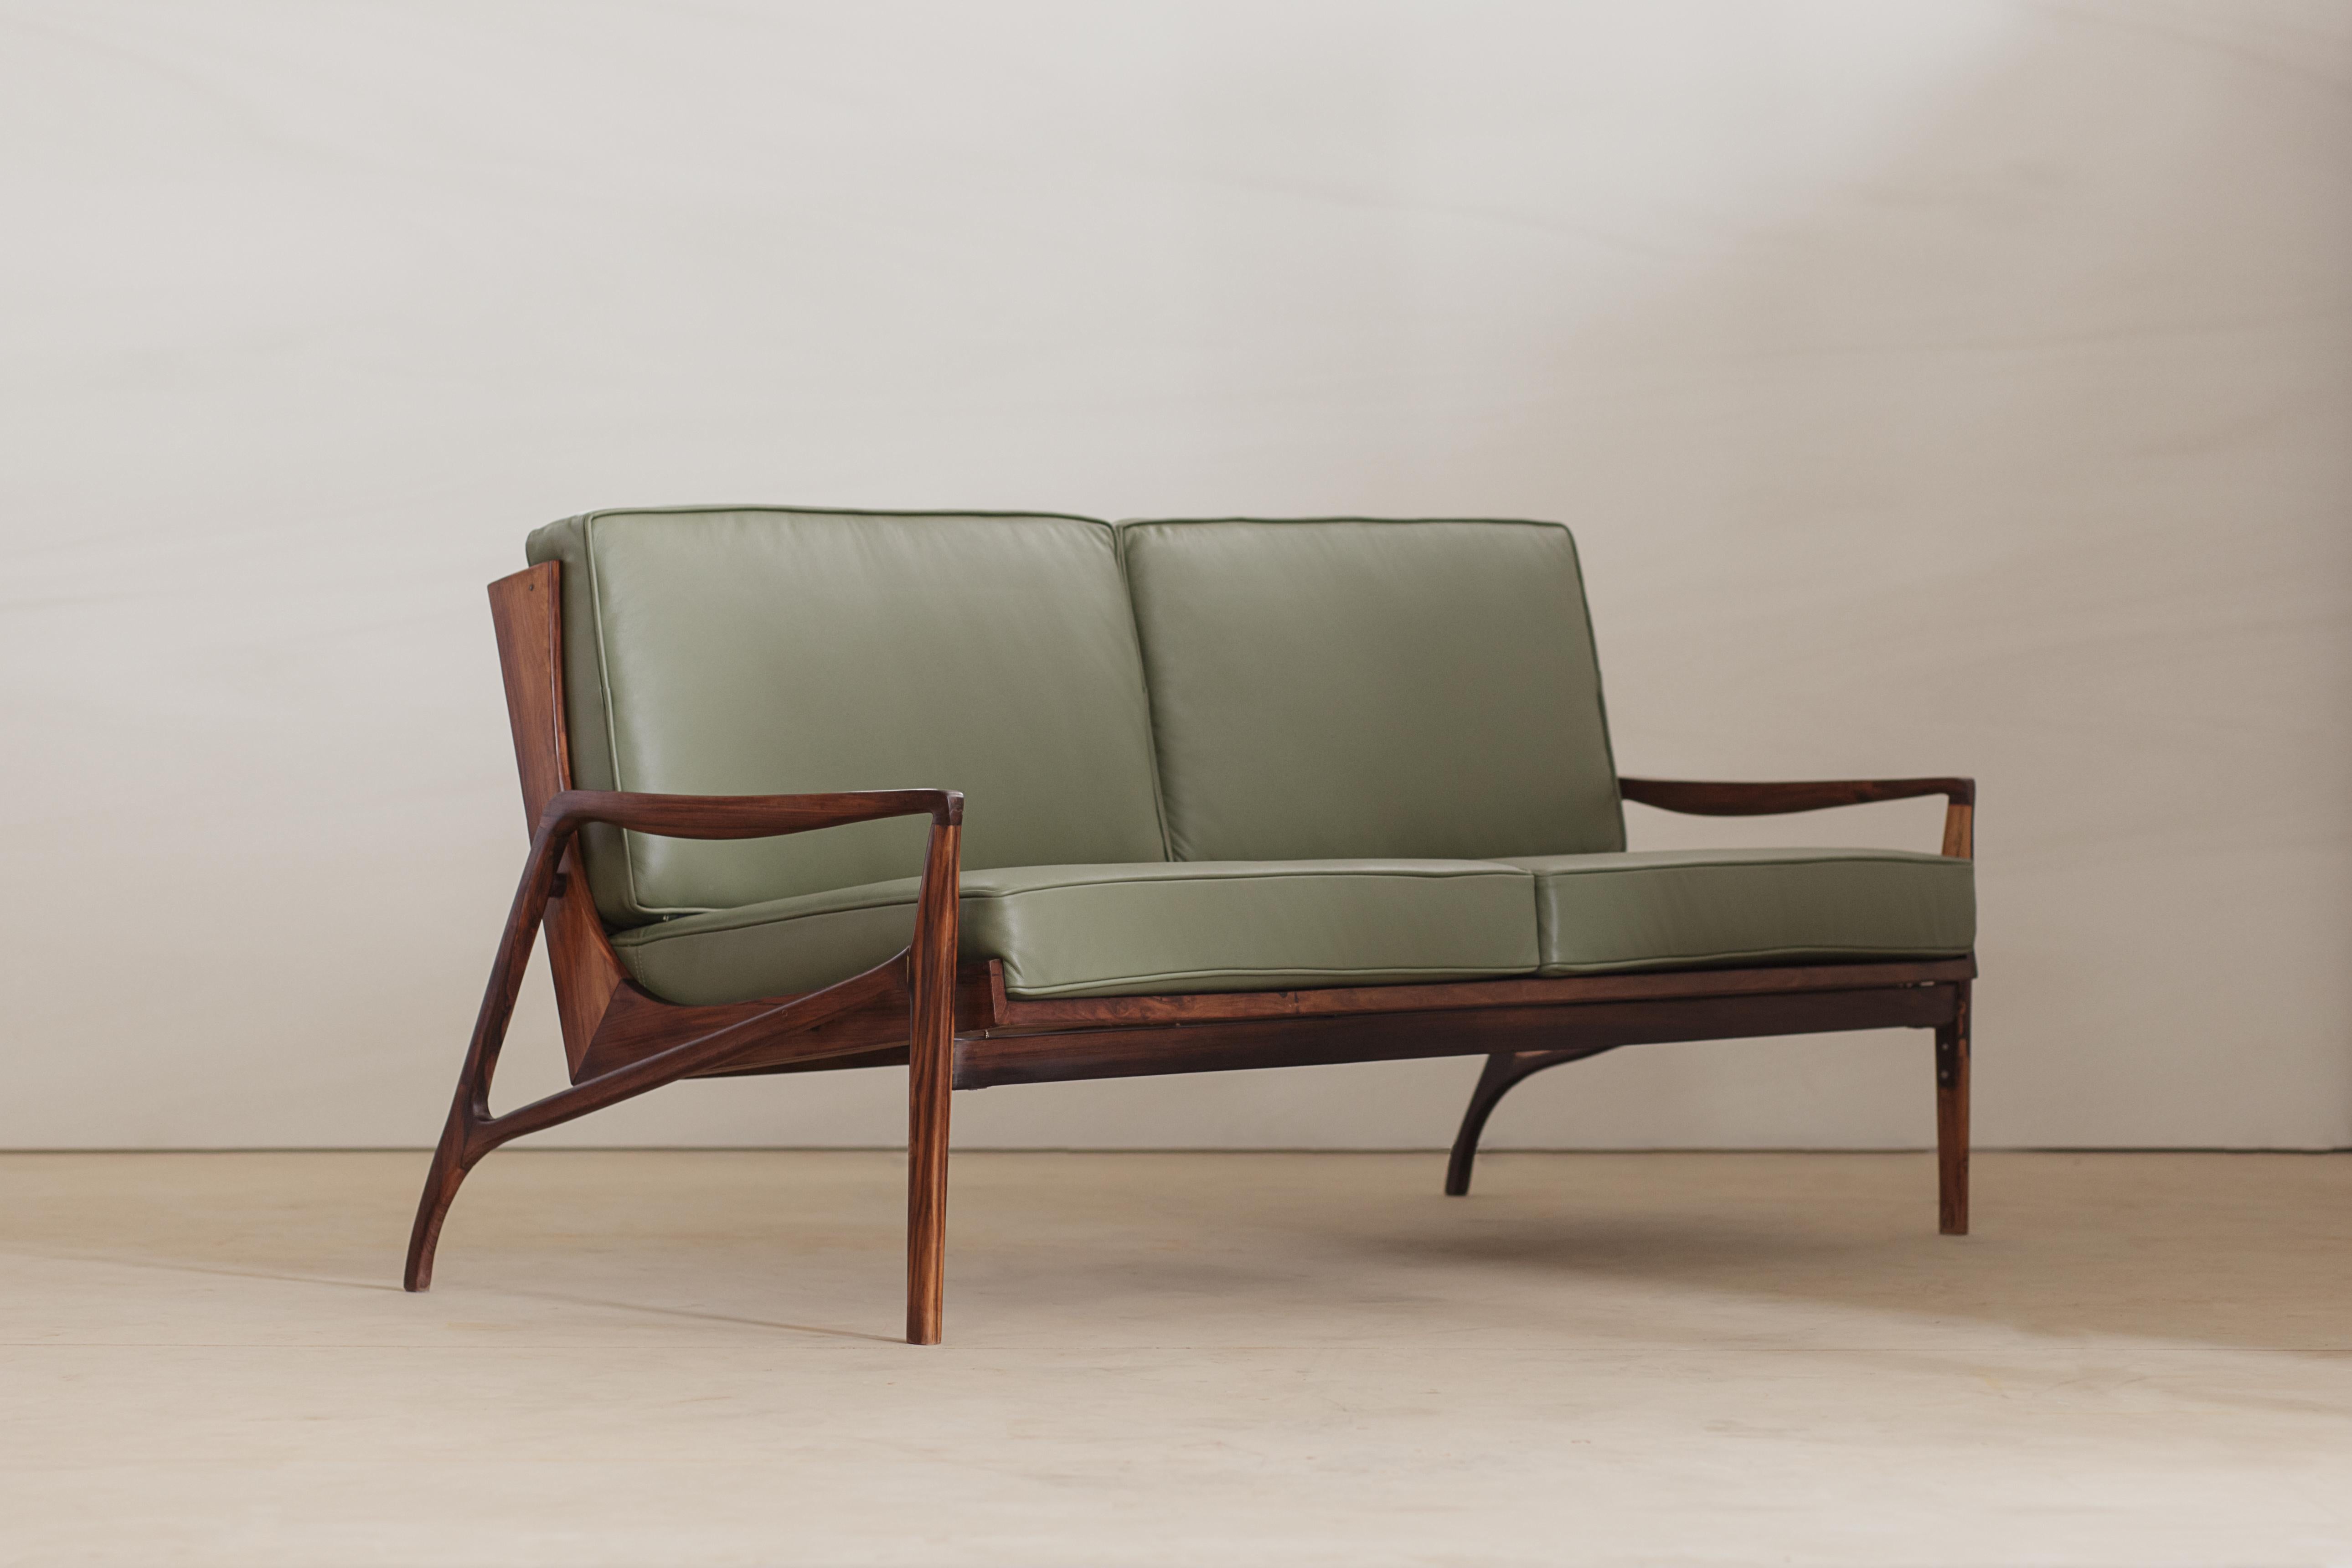 Two-seat sofa designed by Liceu de Artes e Oficios in solid rosewood, Sao Paulo, Brazil, 1960s. The piece has been recently refinished and newly upholstered in natural leather. 

Liceu De Artes & Oficios was established in 1873 by a group of elite